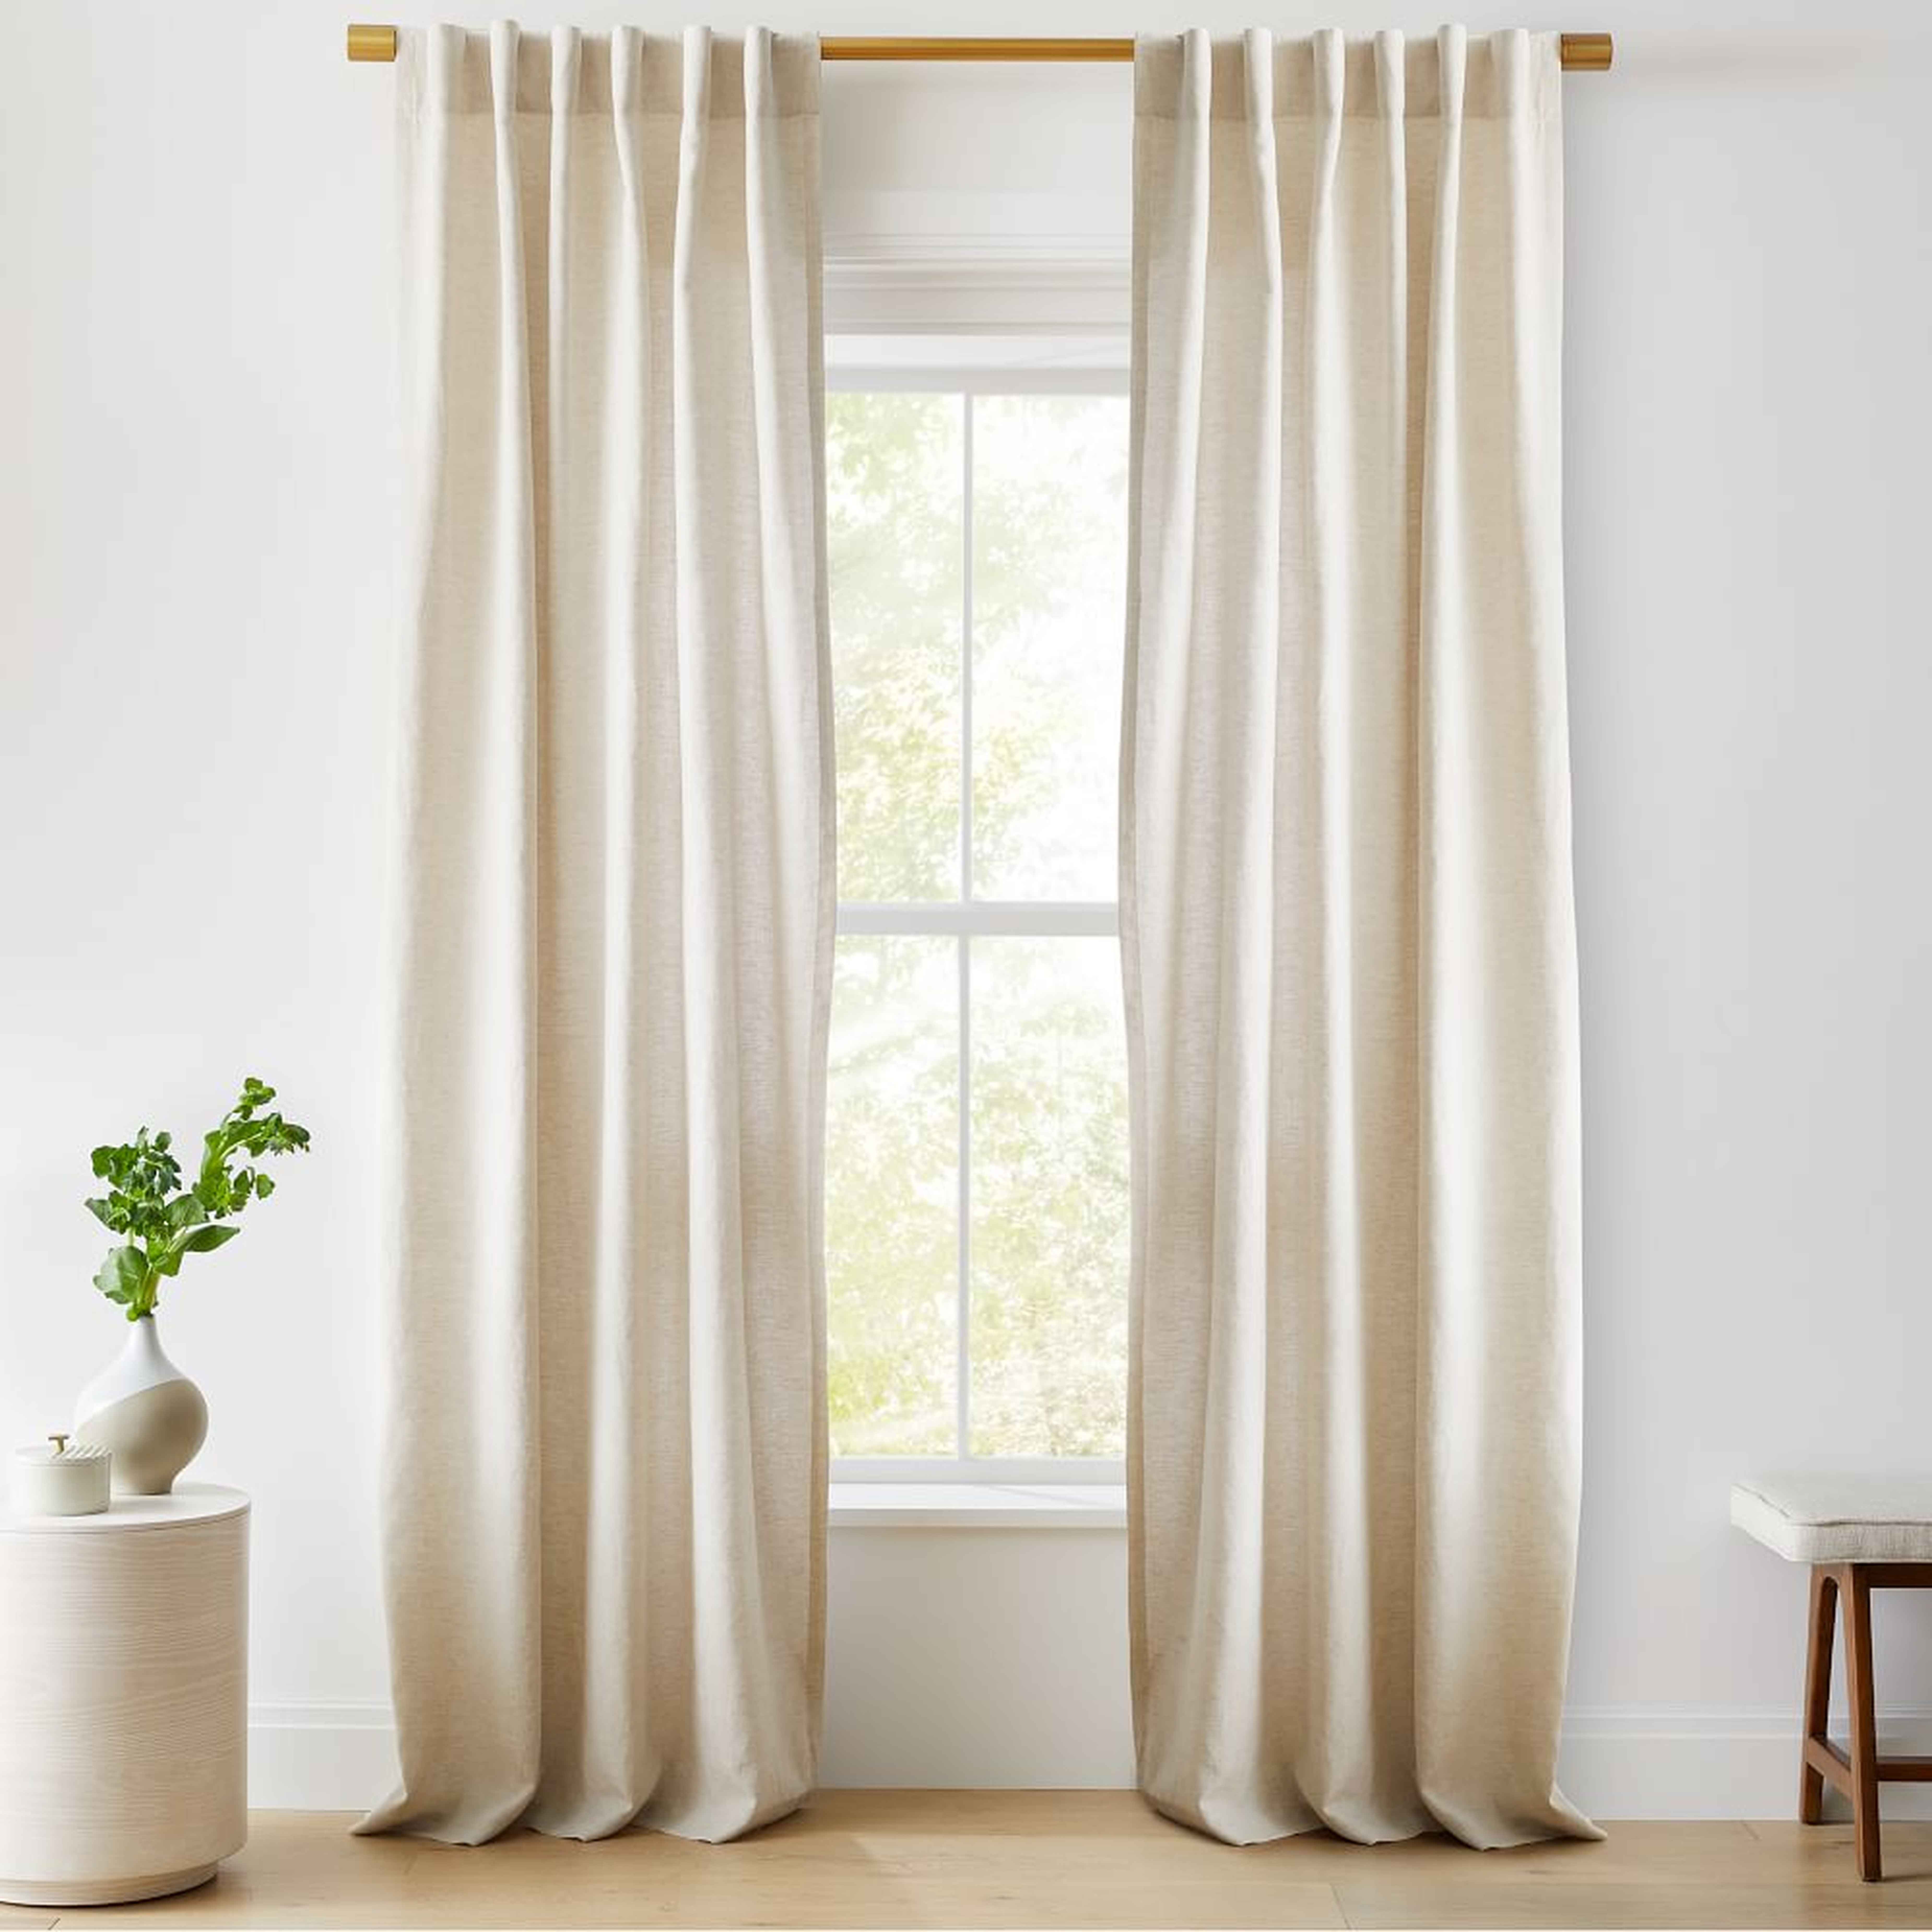 European Flax Linen Curtain with Cotton Lining, Natural, 48"x96" - West Elm